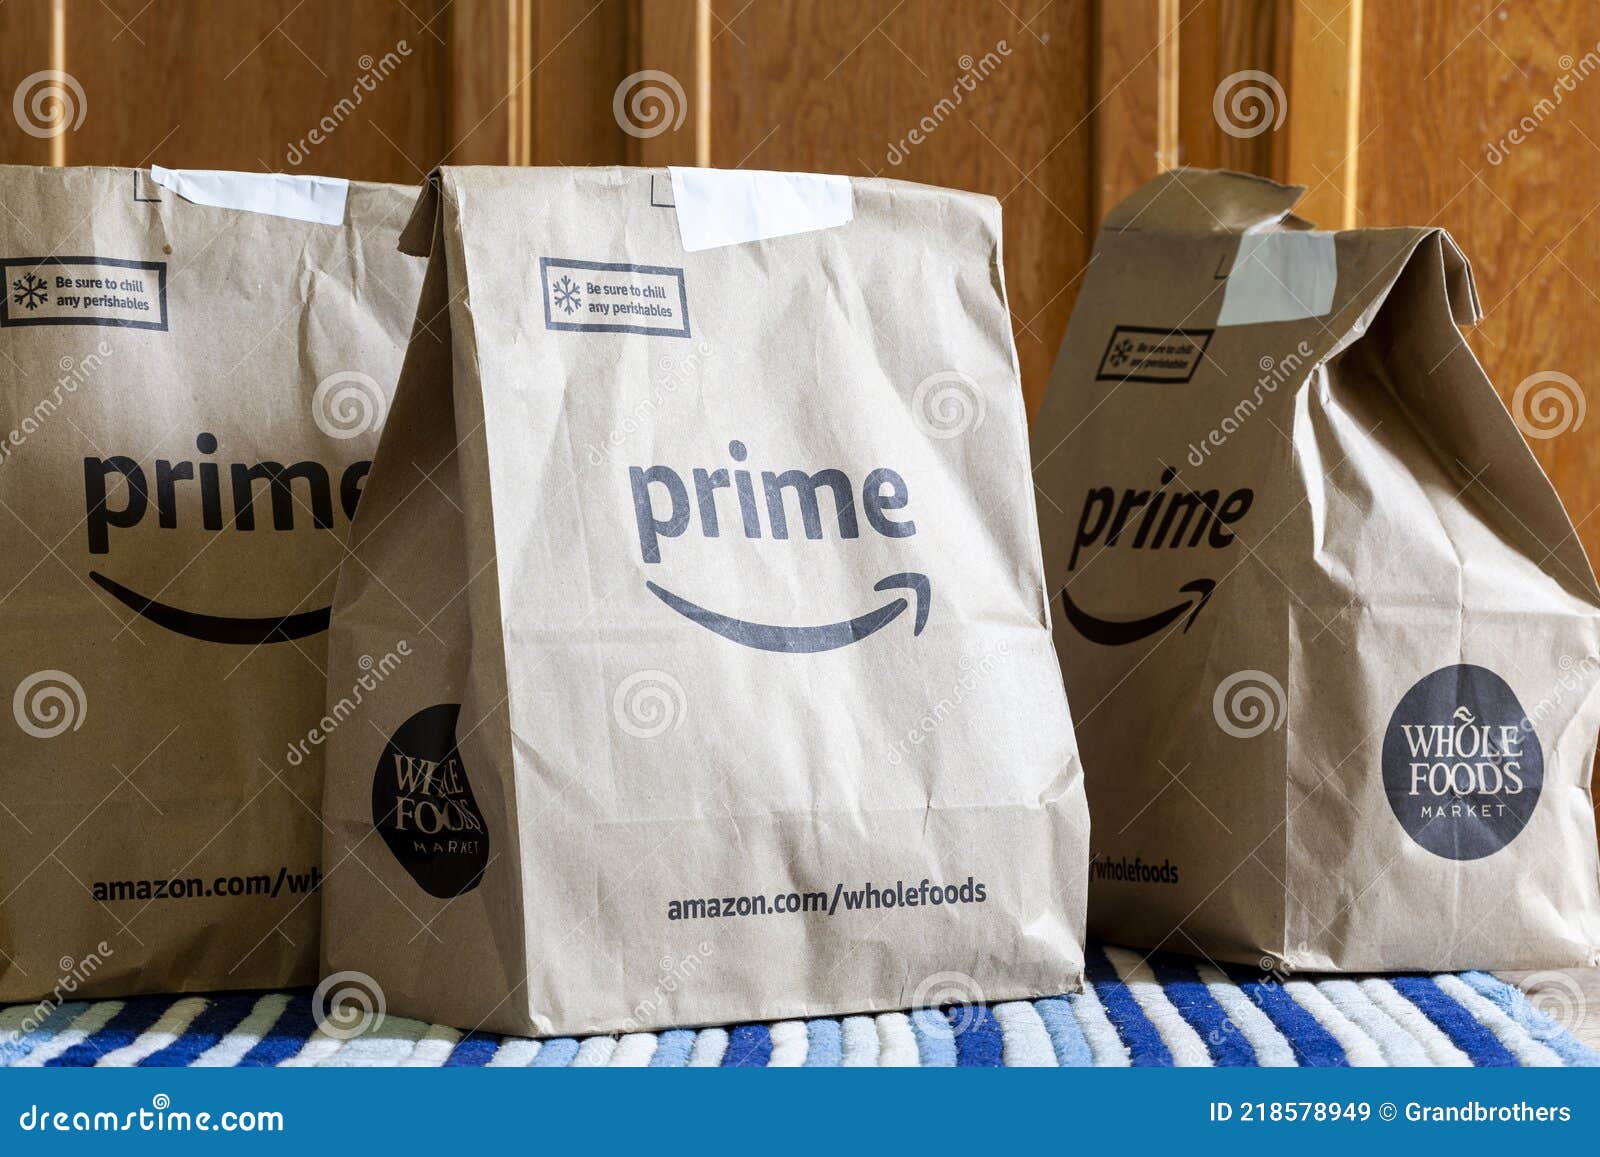 Prime Offers Same Day Free Delivery for Whole Foods Items